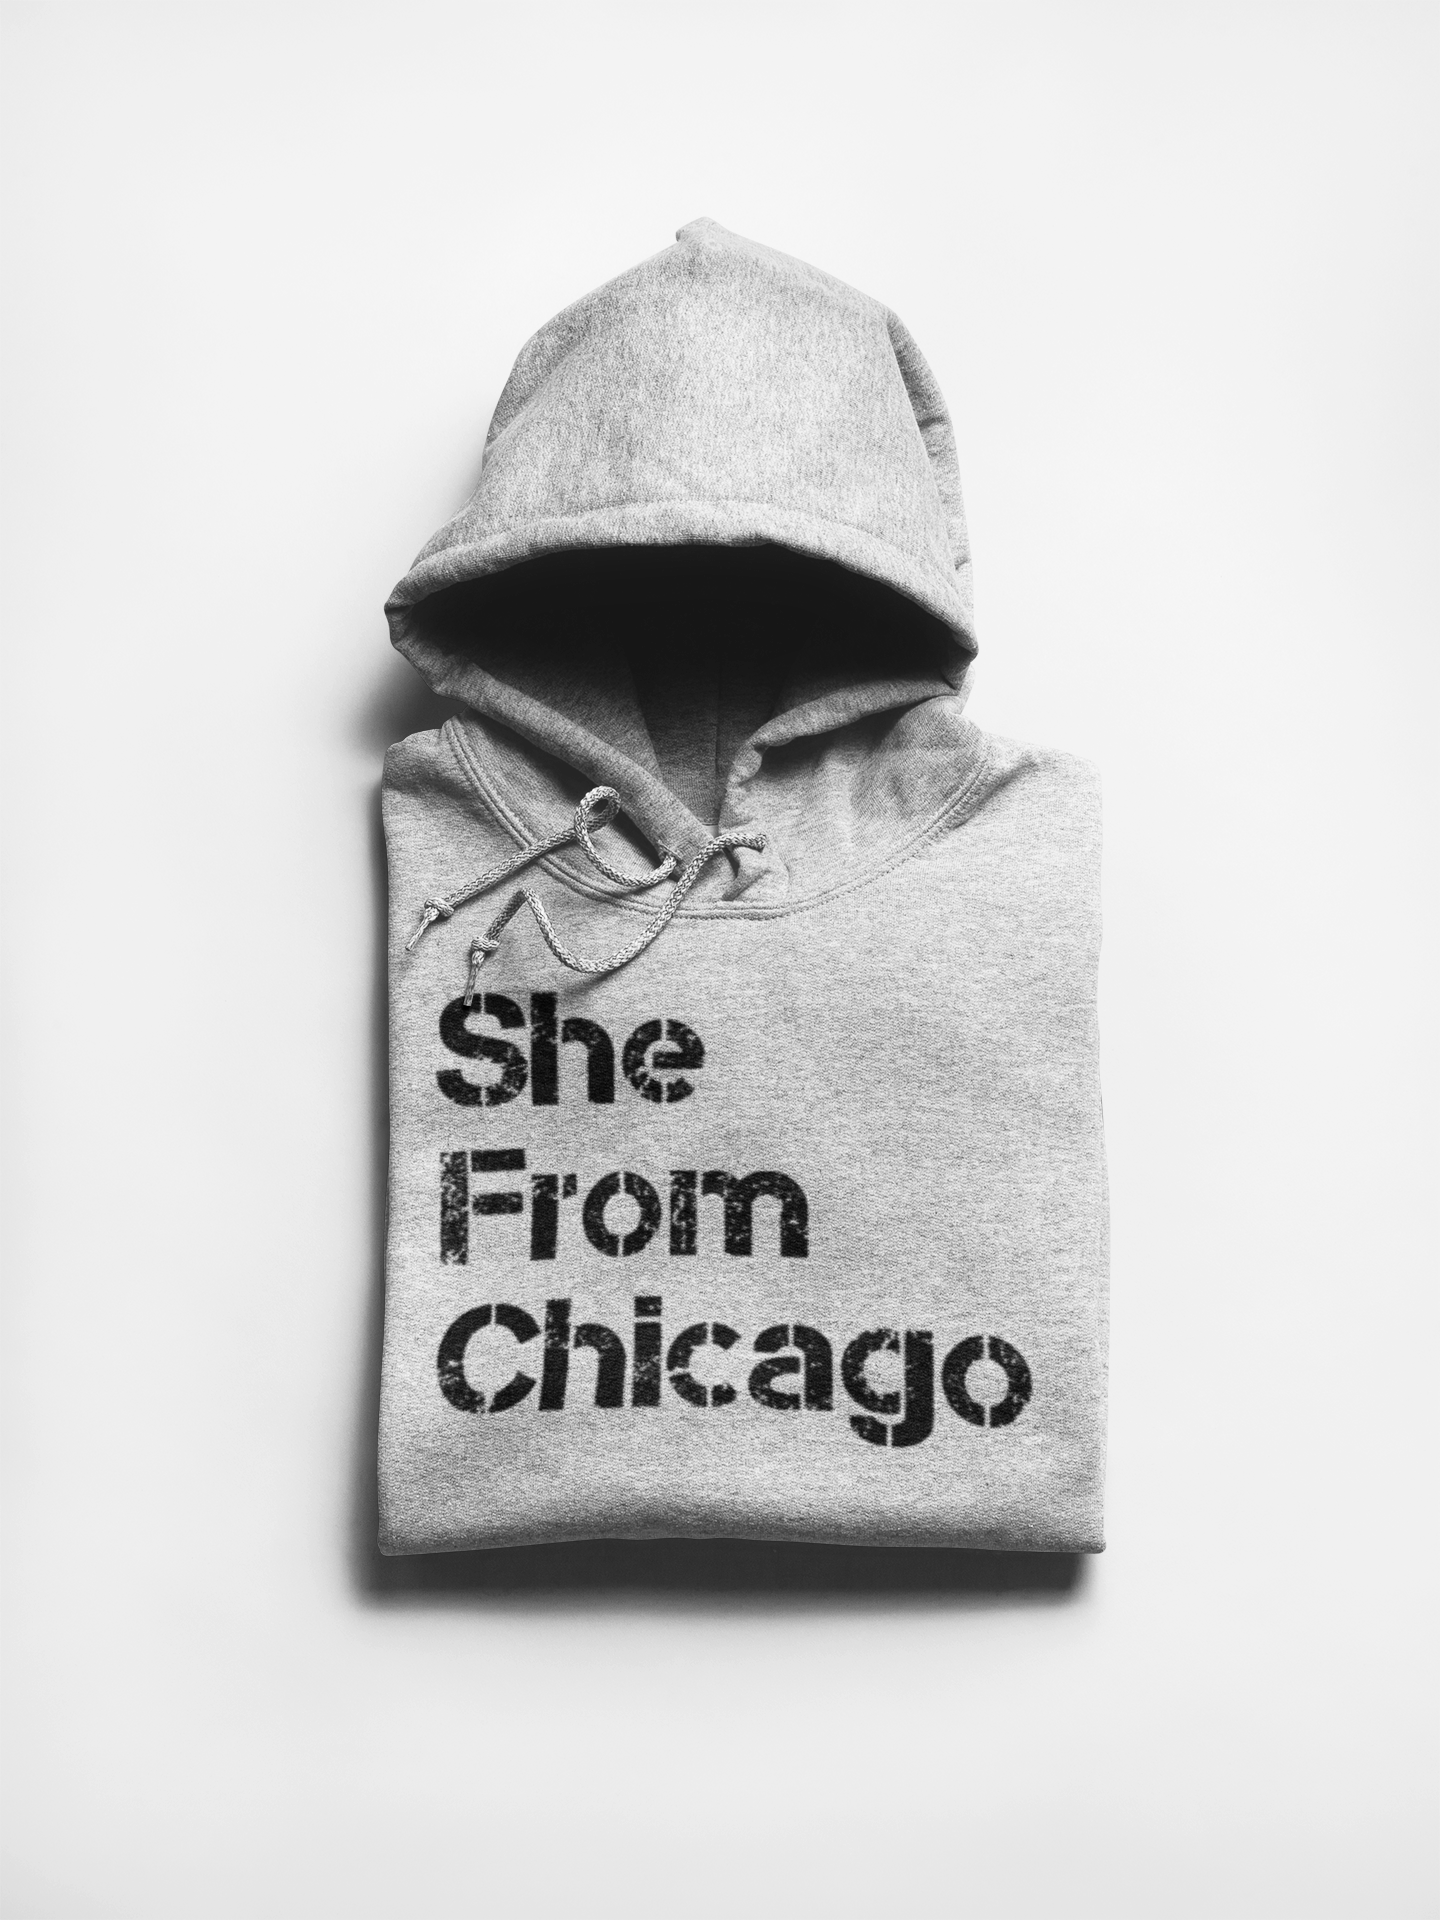 She From Chicago Hoodie